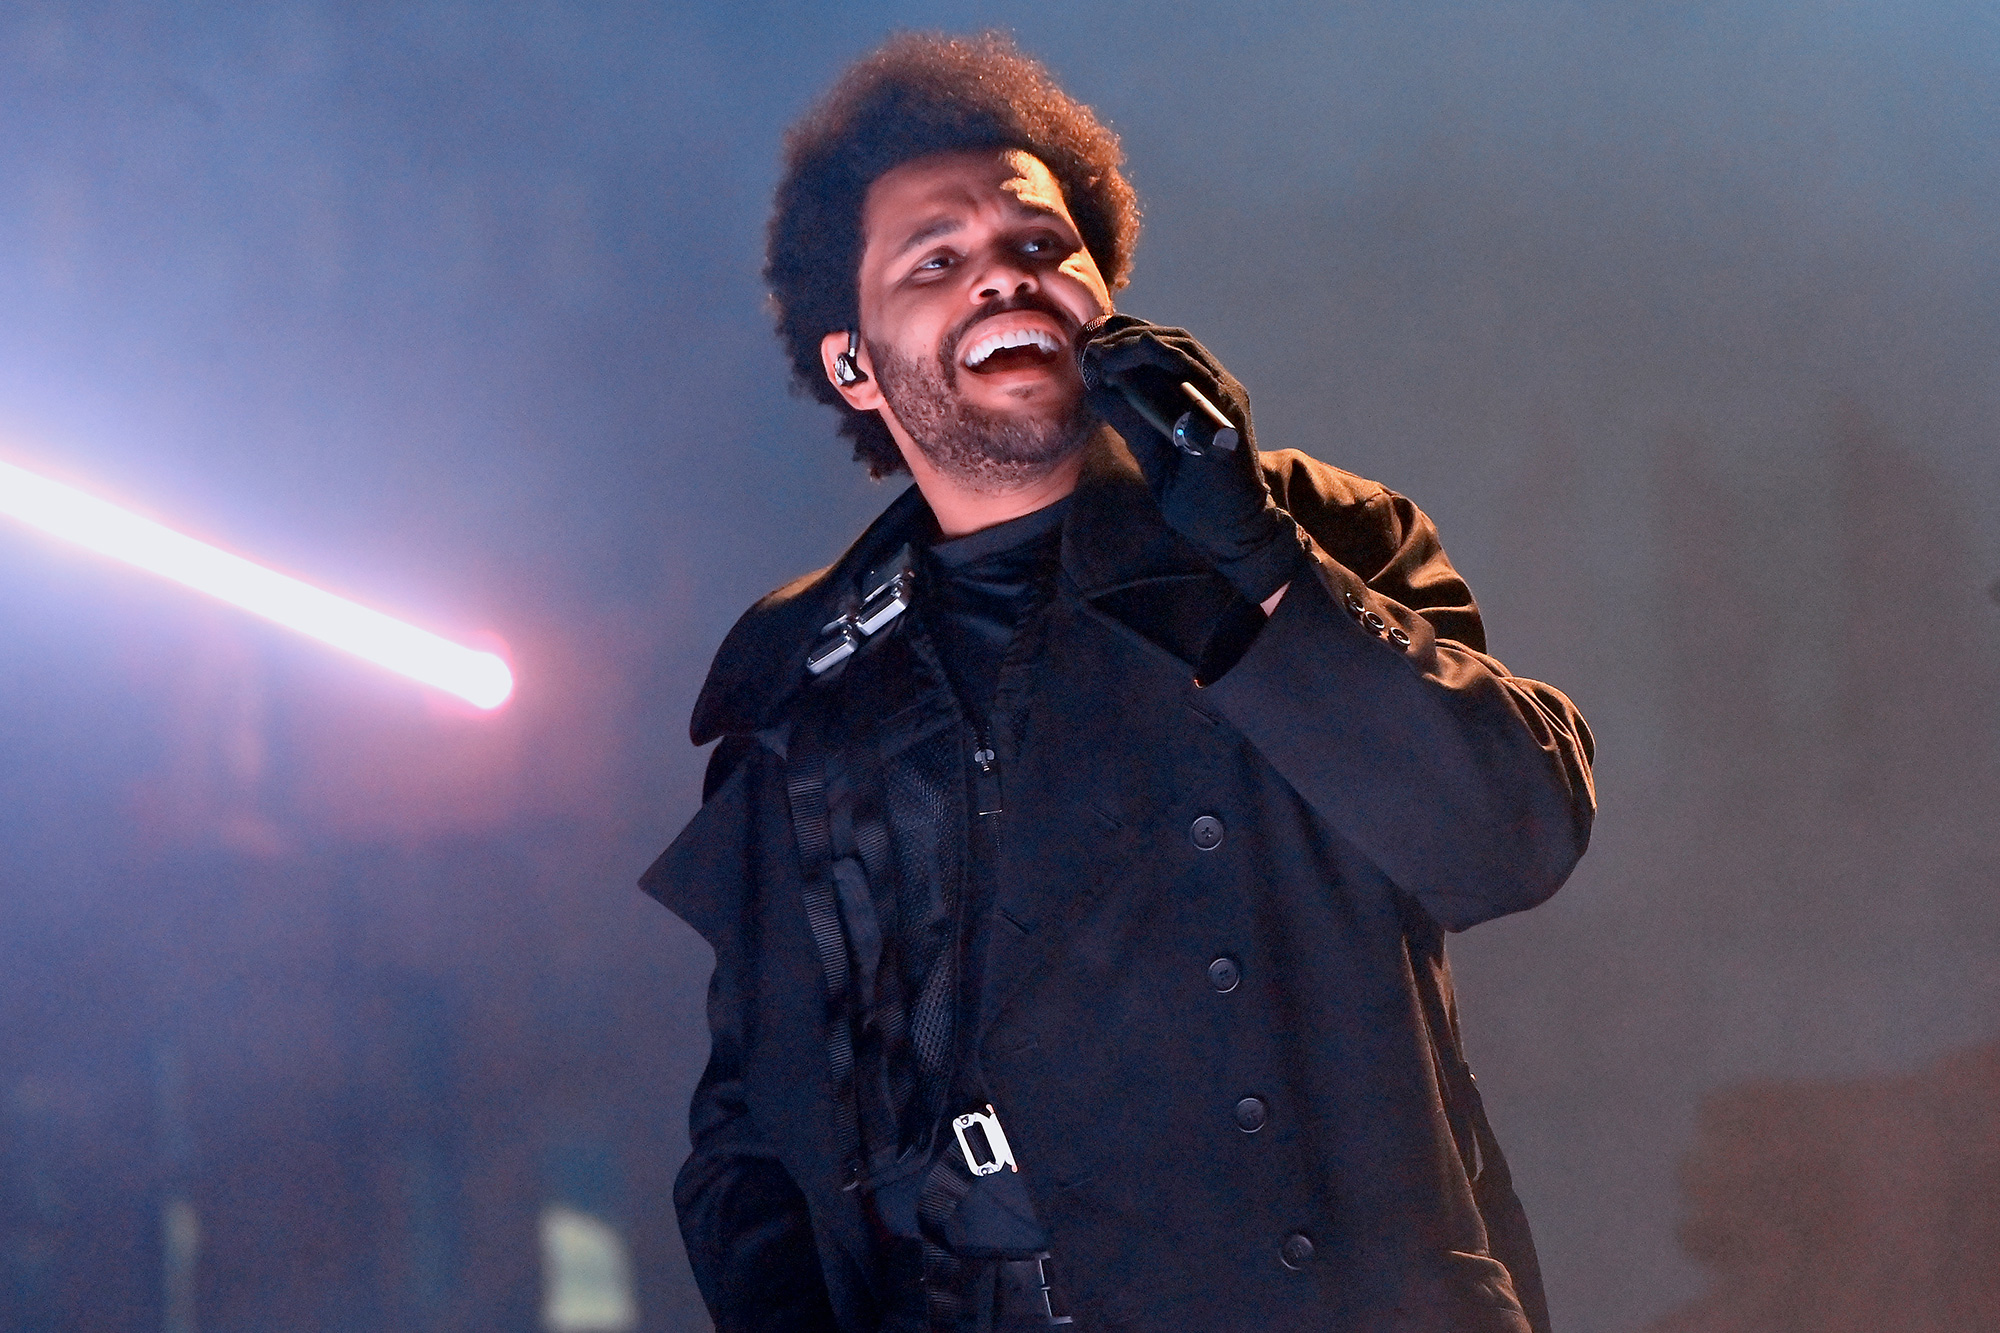 Daft Punk Reunion: The Weeknd's Only Condition for Future Features